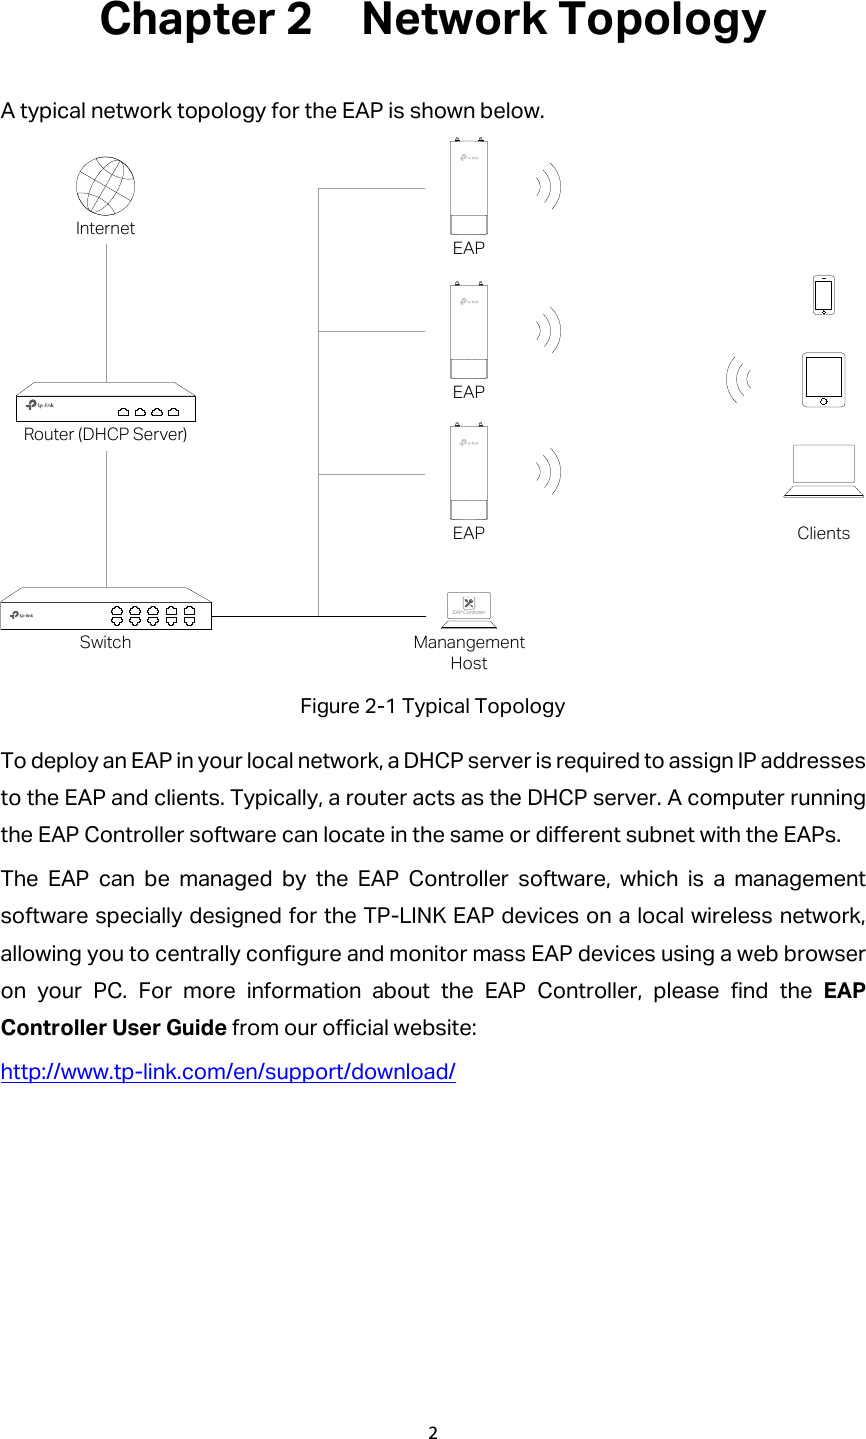 Chapter 2  Network Topology A typical network topology for the EAP is shown below.             Figure 2-1 Typical Topology To deploy an EAP in your local network, a DHCP server is required to assign IP addresses to the EAP and clients. Typically, a router acts as the DHCP server. A computer running the EAP Controller software can locate in the same or different subnet with the EAPs. The  EAP can be managed by the EAP Controller software, which is a management software specially designed for the TP-LINK EAP devices on a local wireless network, allowing you to centrally configure and monitor mass EAP devices using a web browser on your PC. For more information about the EAP Controller, please find  the  EAP Controller User Guide from our official website:   http://www.tp-link.com/en/support/download/     EAPManangementHostSwitchRouter (DHCP Server)InternetClientsEAP ControllerEAPEAP2  